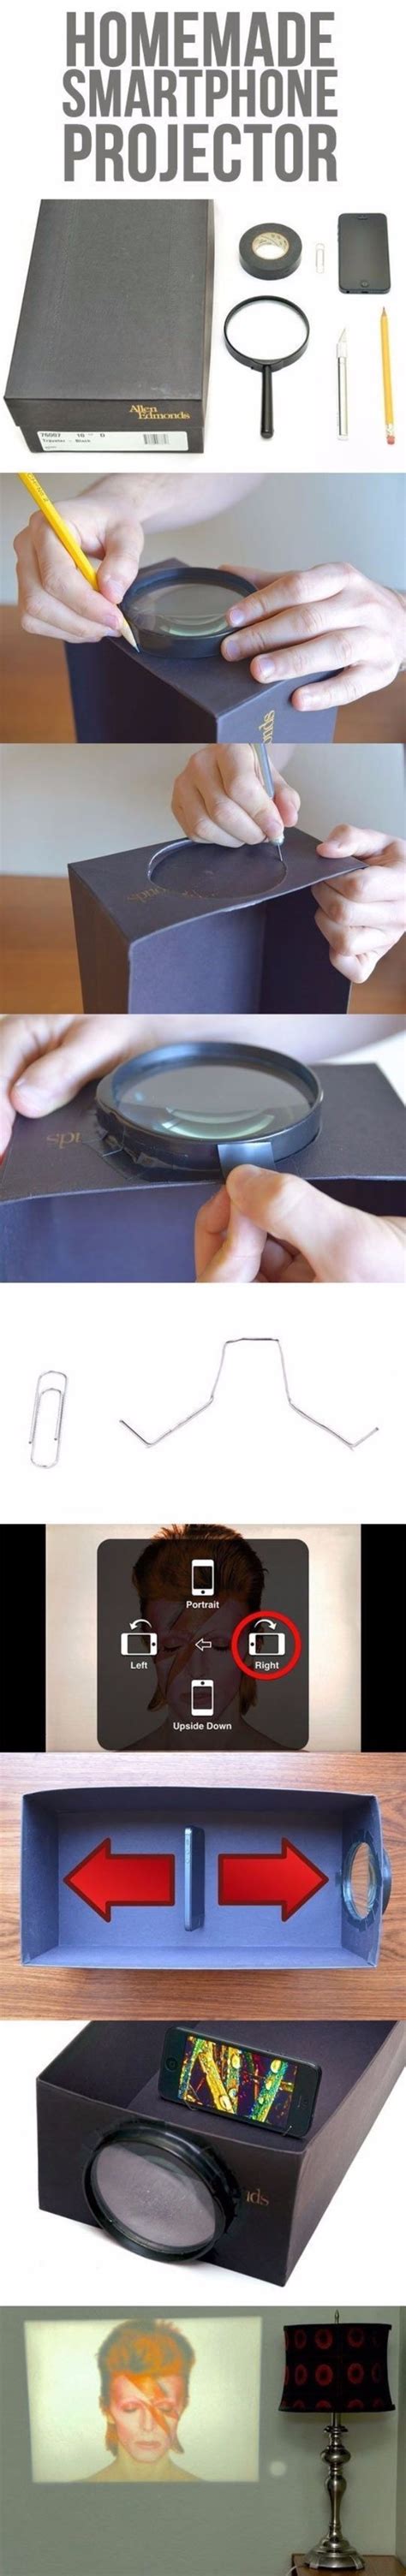 35 Cool Diy Gadgets You Can Make To Impress Your Friends Diy Homemade